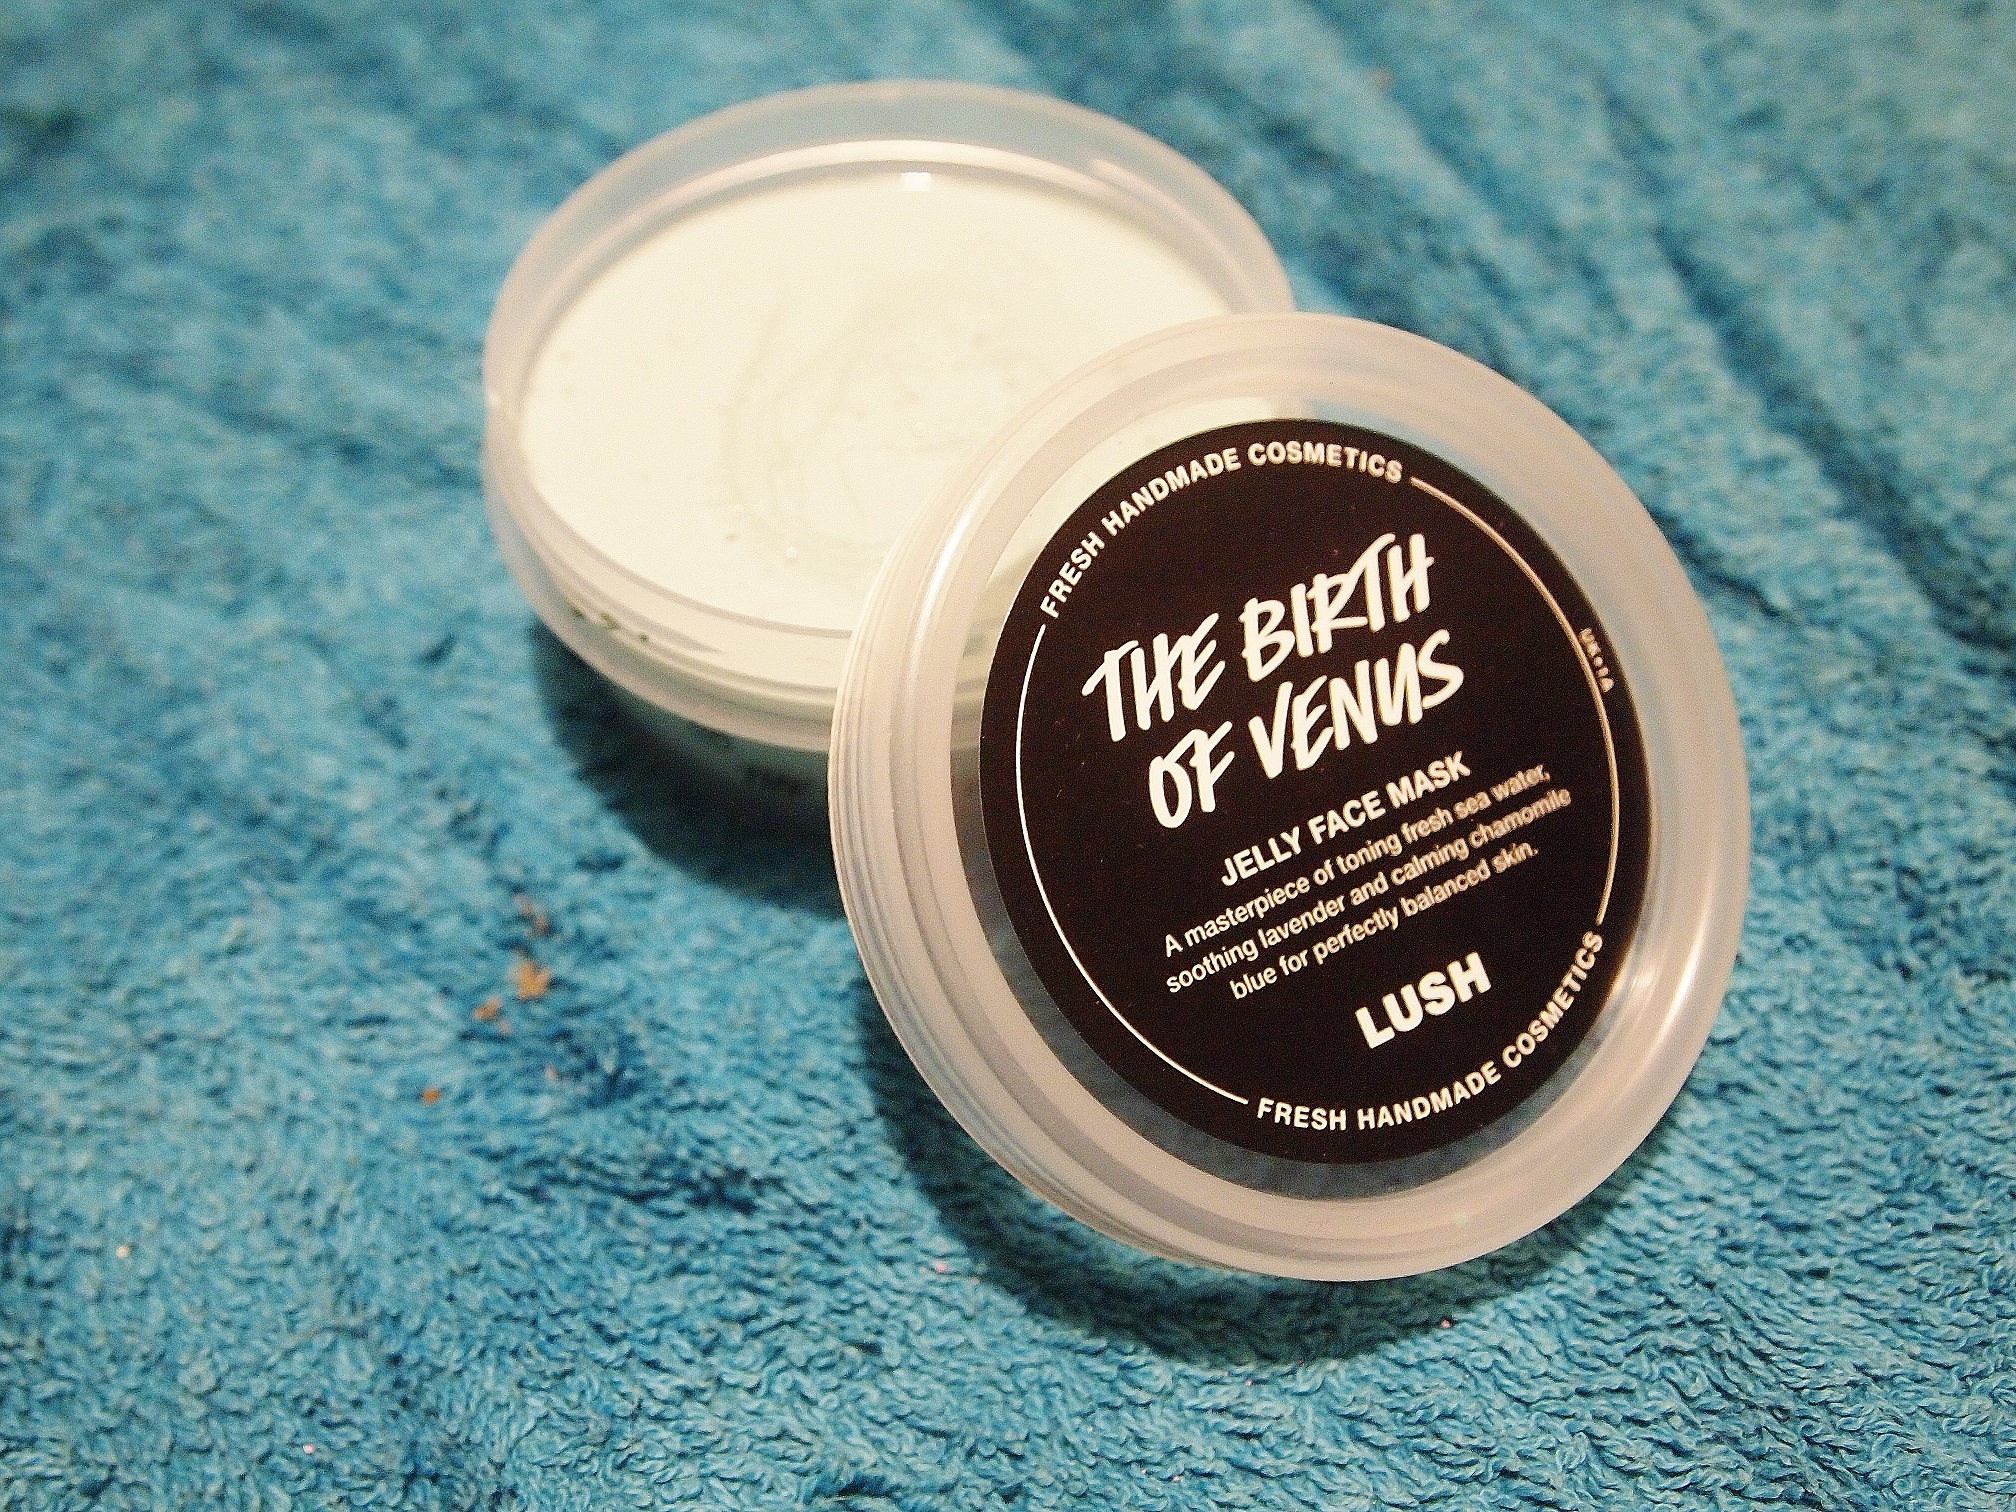 Lush The Birth of Venus Jelly Face Mask